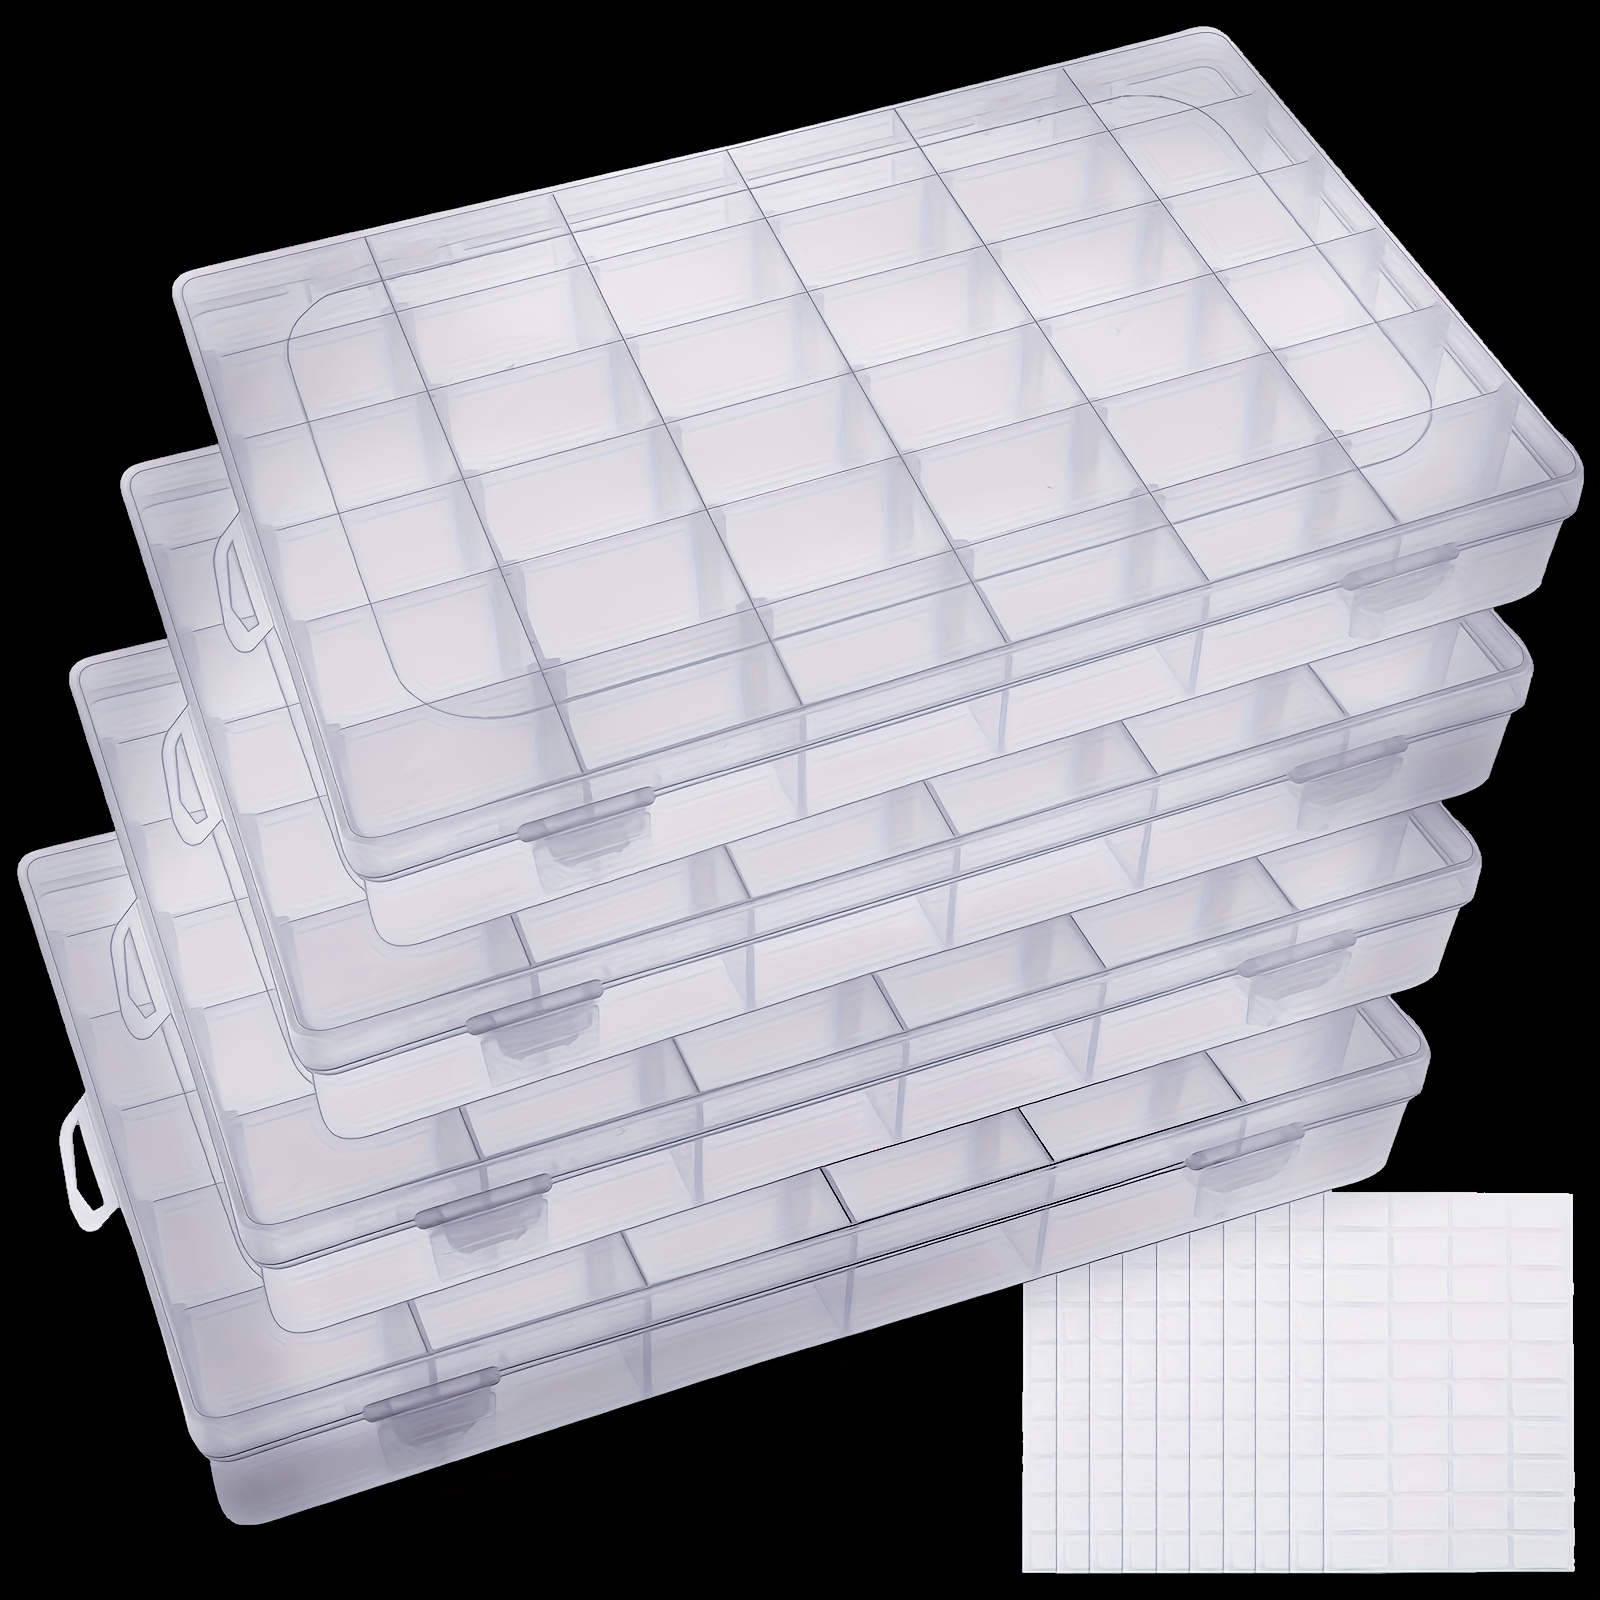  10 Grids Portable Plastic Organizer Container Storage Box,with  Adjustable Grid (2 pcs)